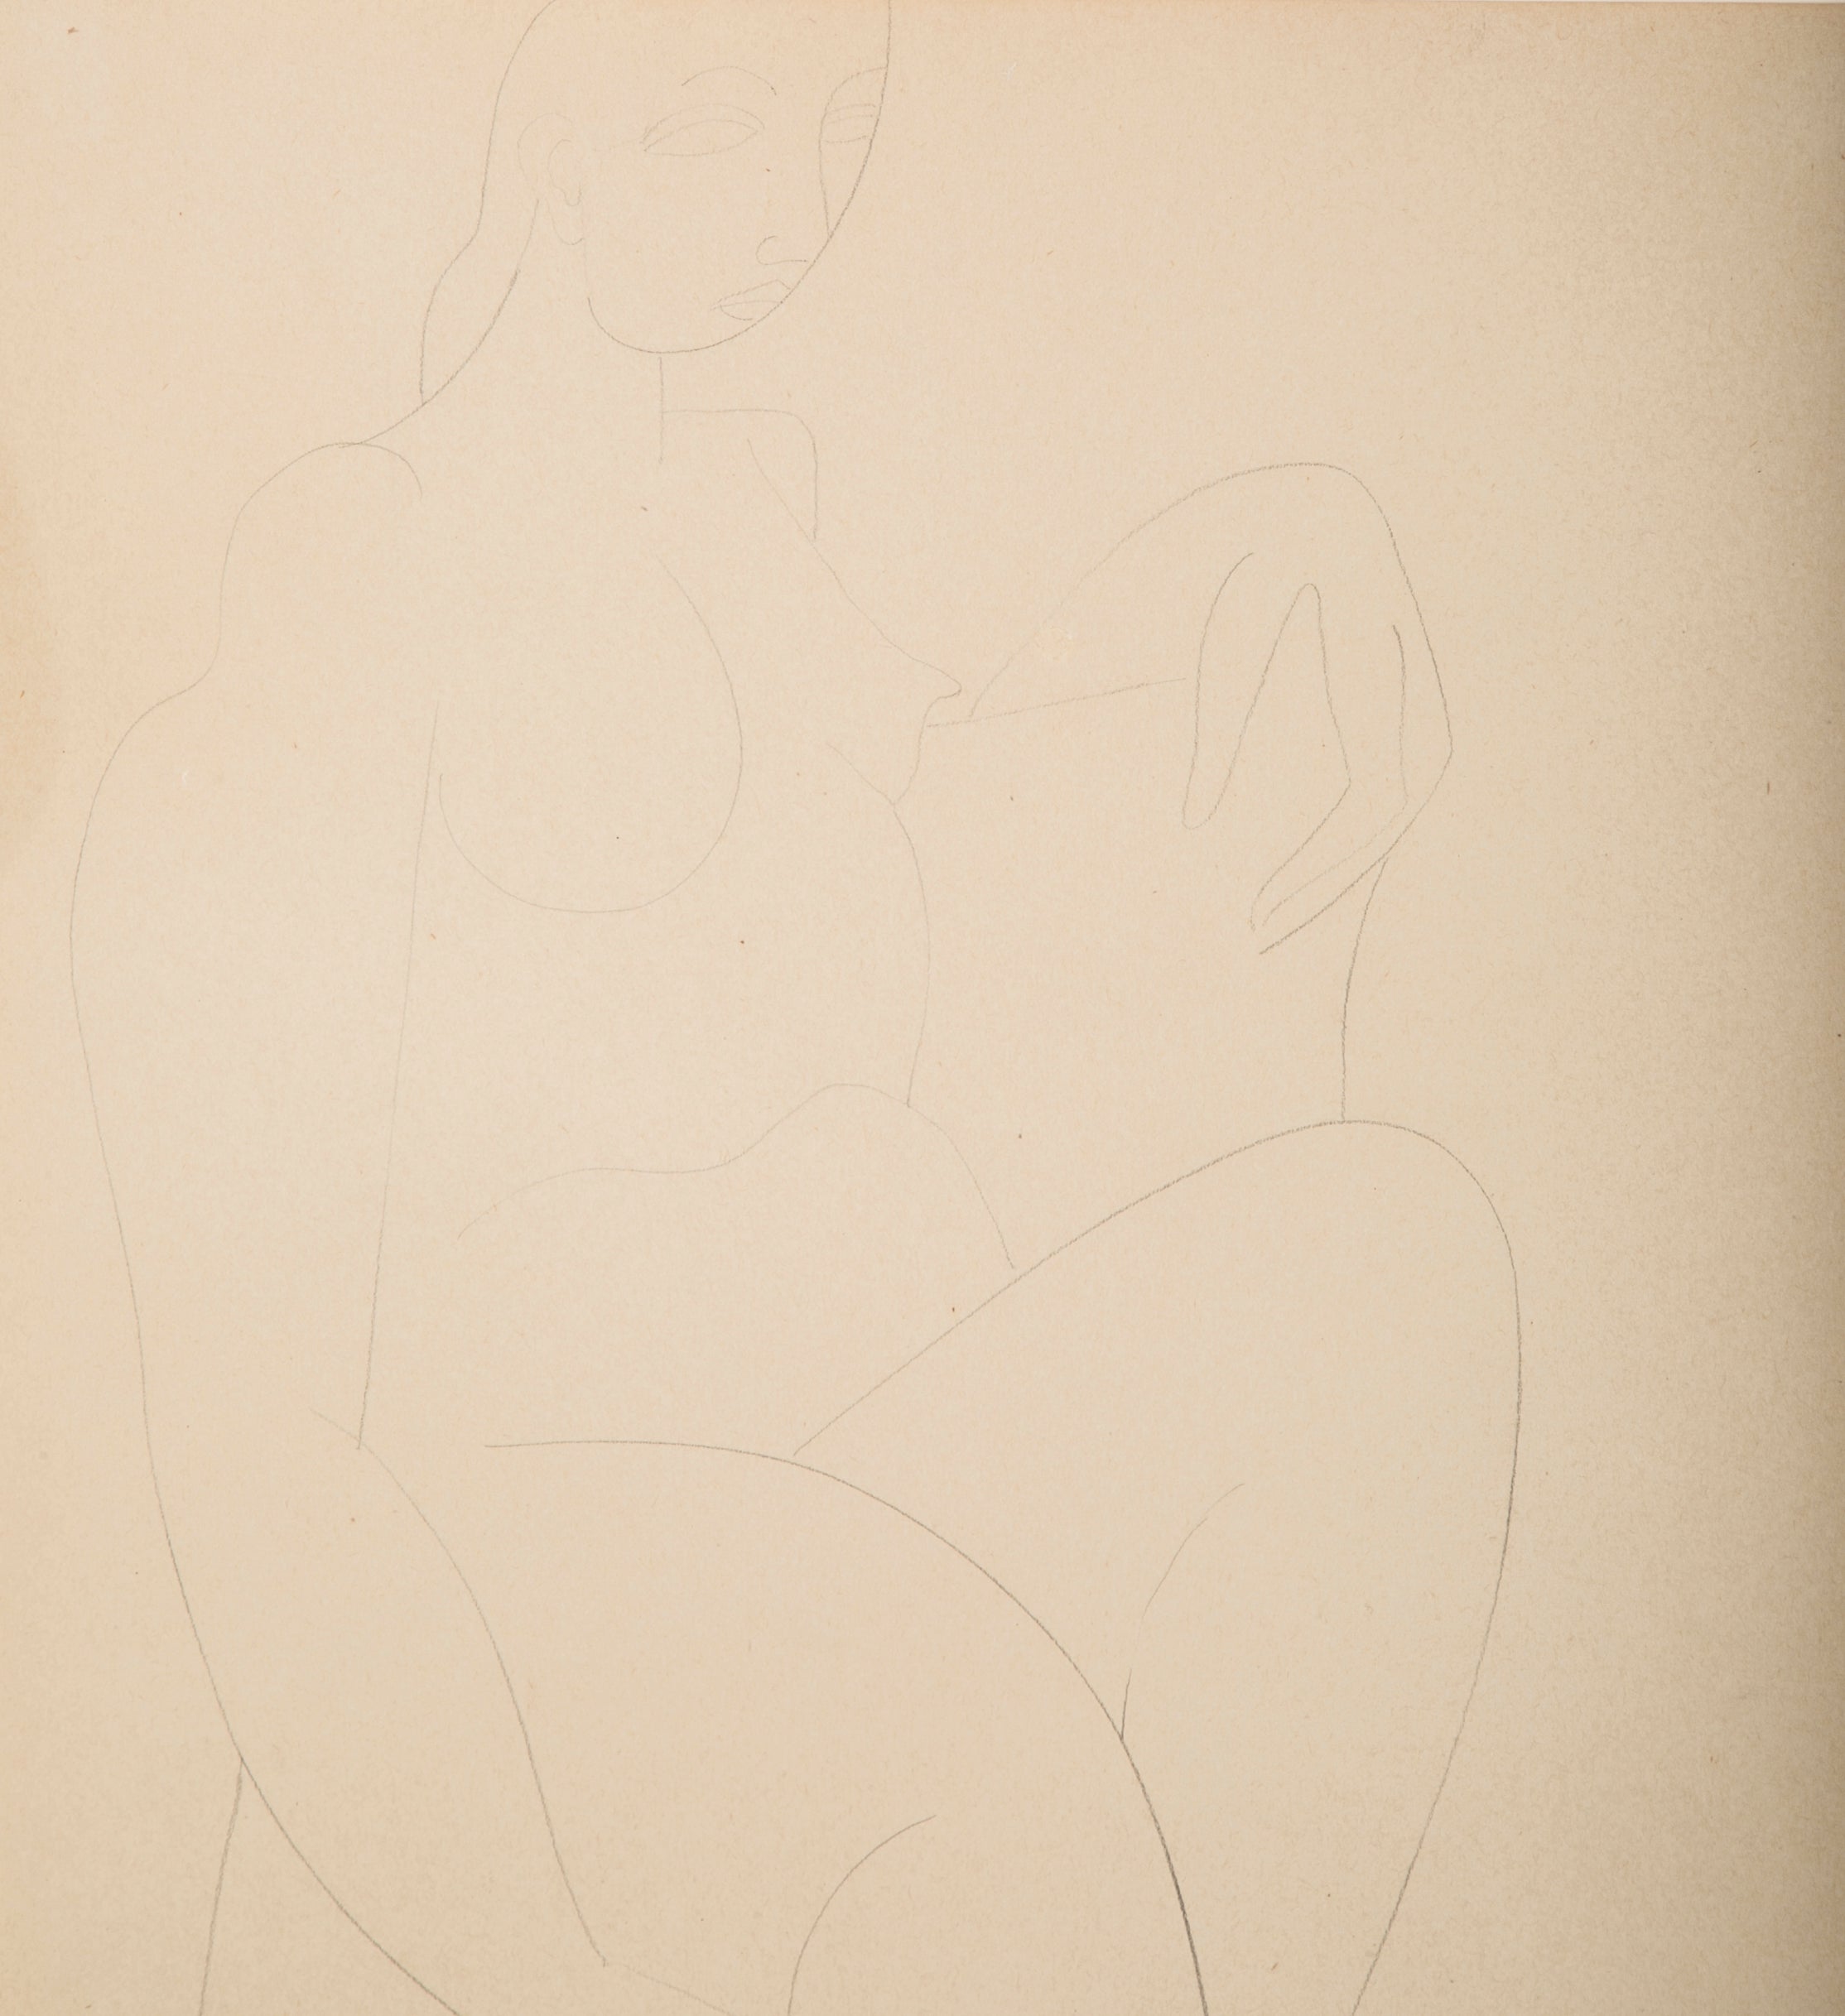 A Pencil Drawing by Louise Nevelson.